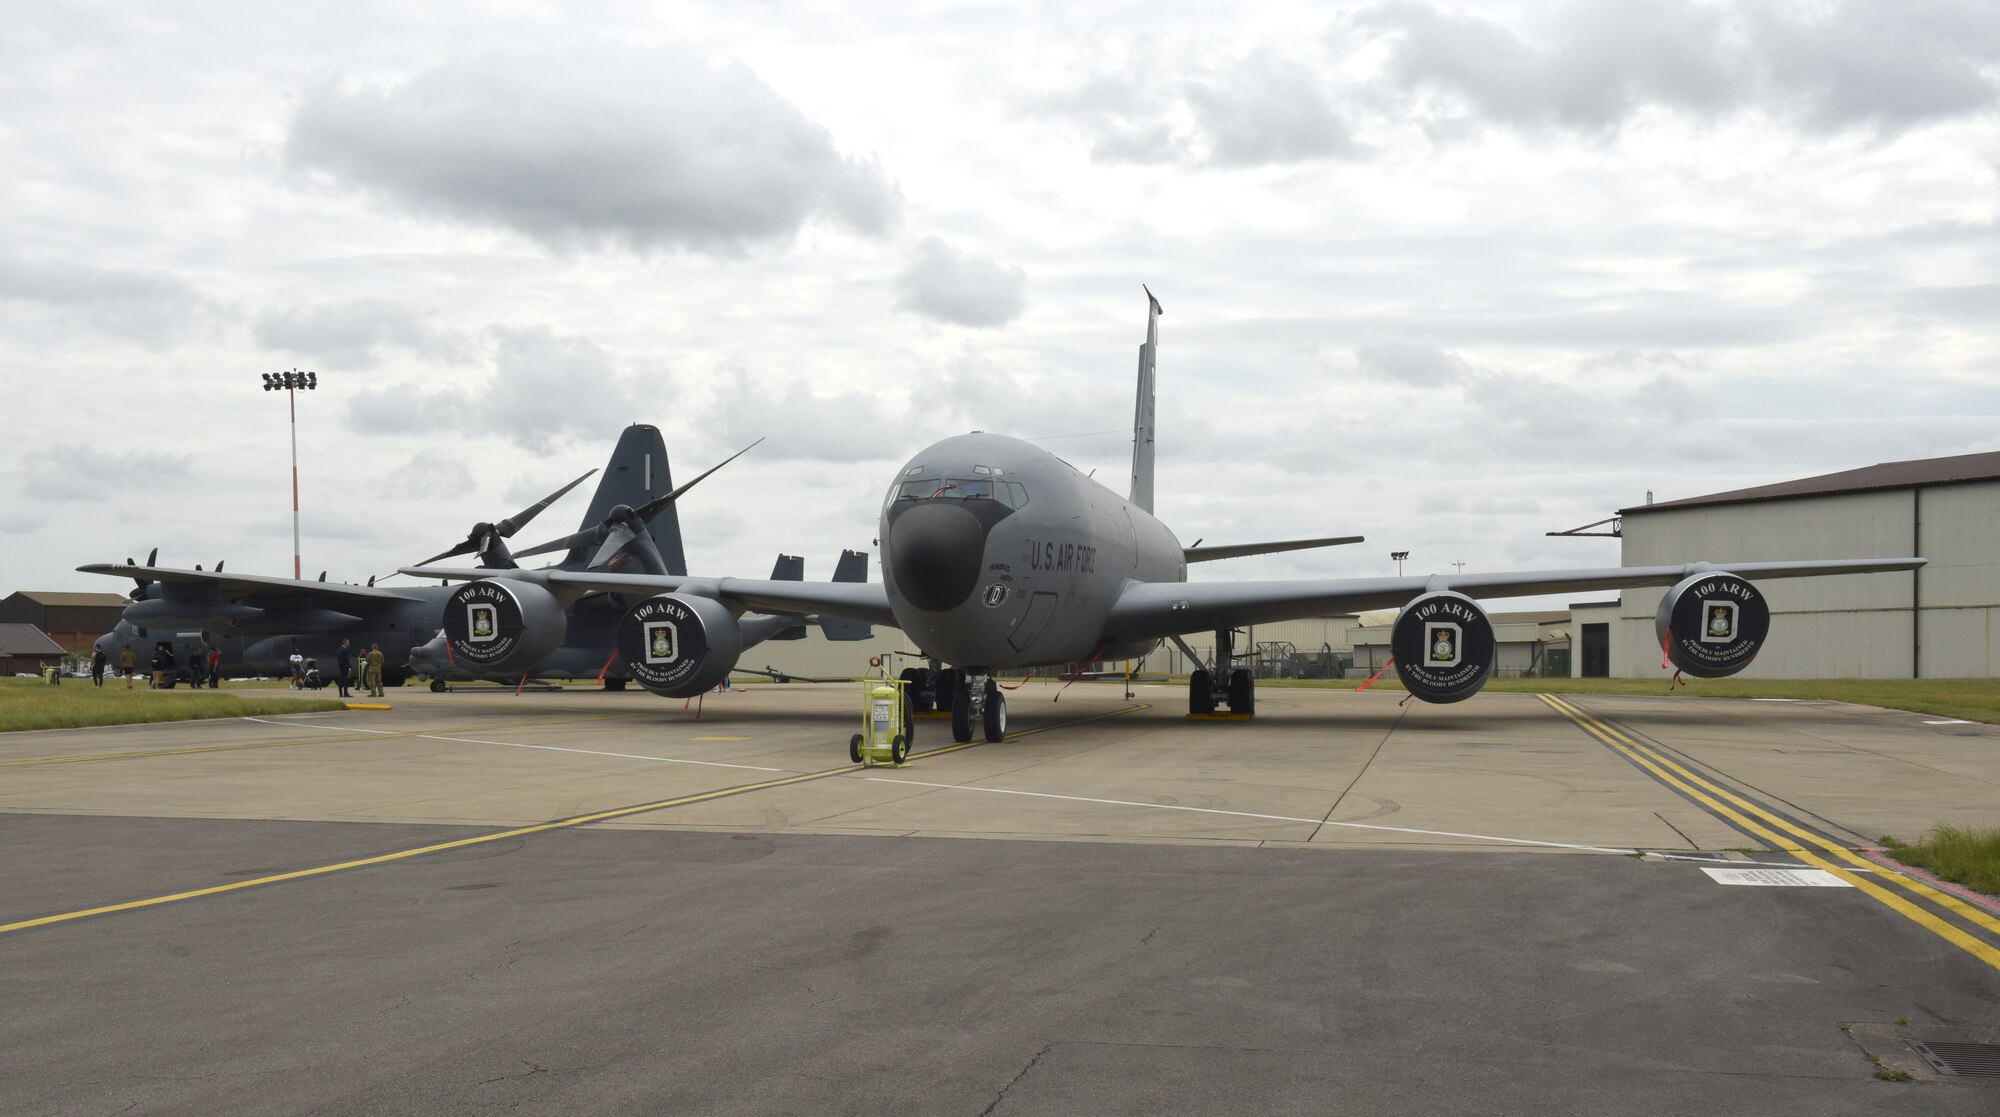 A U.S. Air Force MC-130J Commando II, CV-22 Osprey and KC-135 Stratotanker sit on the flightline during Diversity and Inclusion Day at Royal Air Force Mildenhall, England, Aug. 13, 2021. The event included a variety of performances, food and informational booths, a fire truck and Humvee. (U.S. Air Force photo by Karen Abeyasekere)